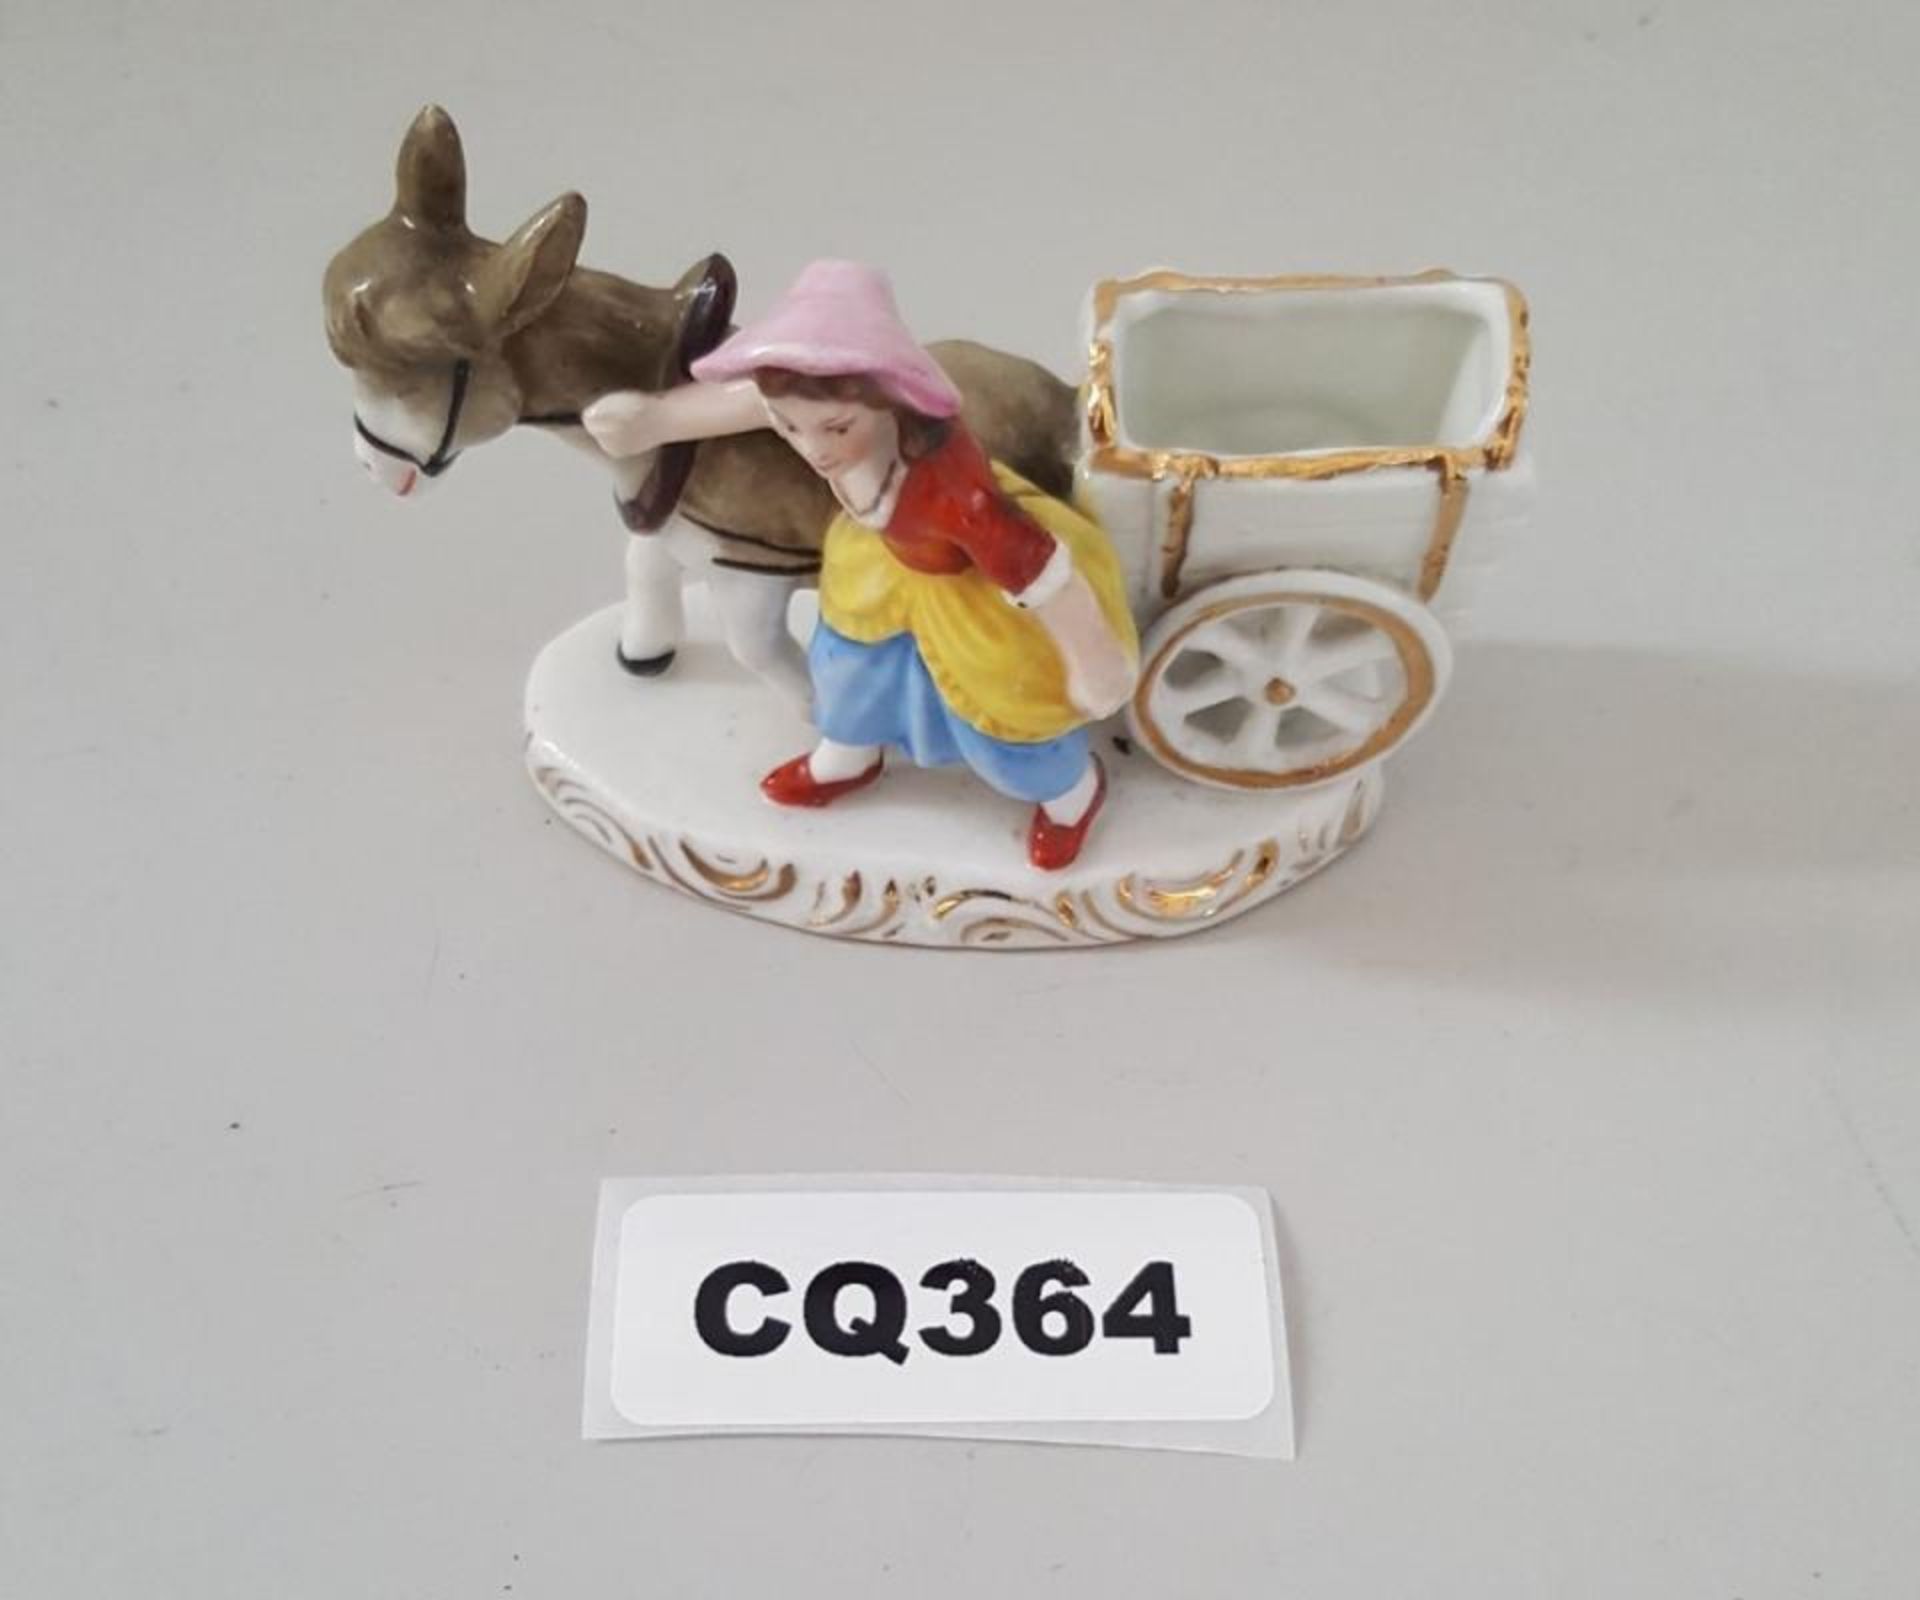 1 x Small Porcelain Figurine Of Women With Horse And Cart - Ref CQ364 E - Dimensions: H7/L9 cm - CL3 - Image 2 of 4